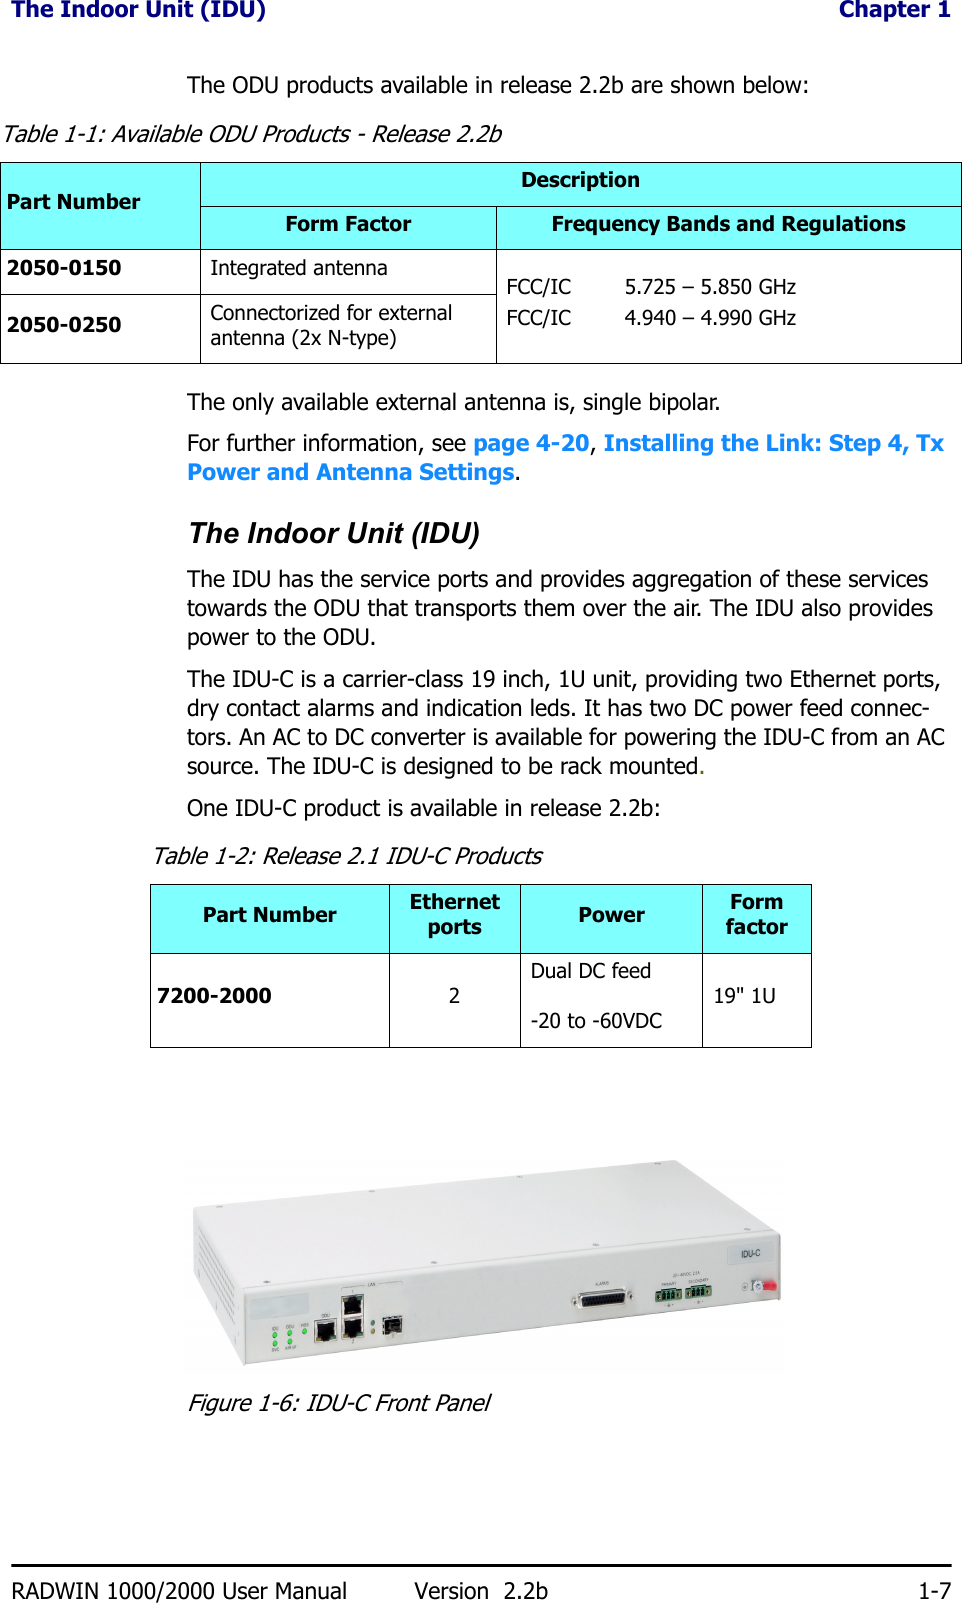 The Indoor Unit (IDU)  Chapter 1RADWIN 1000/2000 User Manual Version  2.2b 1-7The ODU products available in release 2.2b are shown below:The only available external antenna is, single bipolar.For further information, see page 4-20, Installing the Link: Step 4, Tx Power and Antenna Settings.The Indoor Unit (IDU)The IDU has the service ports and provides aggregation of these services towards the ODU that transports them over the air. The IDU also provides power to the ODU.The IDU-C is a carrier-class 19 inch, 1U unit, providing two Ethernet ports, dry contact alarms and indication leds. It has two DC power feed connec-tors. An AC to DC converter is available for powering the IDU-C from an AC source. The IDU-C is designed to be rack mounted.One IDU-C product is available in release 2.2b:Figure 1-6: IDU-C Front PanelTable 1-1: Available ODU Products - Release 2.2bPart NumberDescriptionForm Factor Frequency Bands and Regulations2050-0150 Integrated antenna  FCC/IC 5.725 – 5.850 GHzFCC/IC 4.940 – 4.990 GHz2050-0250 Connectorized for external antenna (2x N-type)Table 1-2: Release 2.1 IDU-C ProductsPart Number Ethernet ports Power Form factor7200-2000 2Dual DC feed-20 to -60VDC 19&quot; 1U